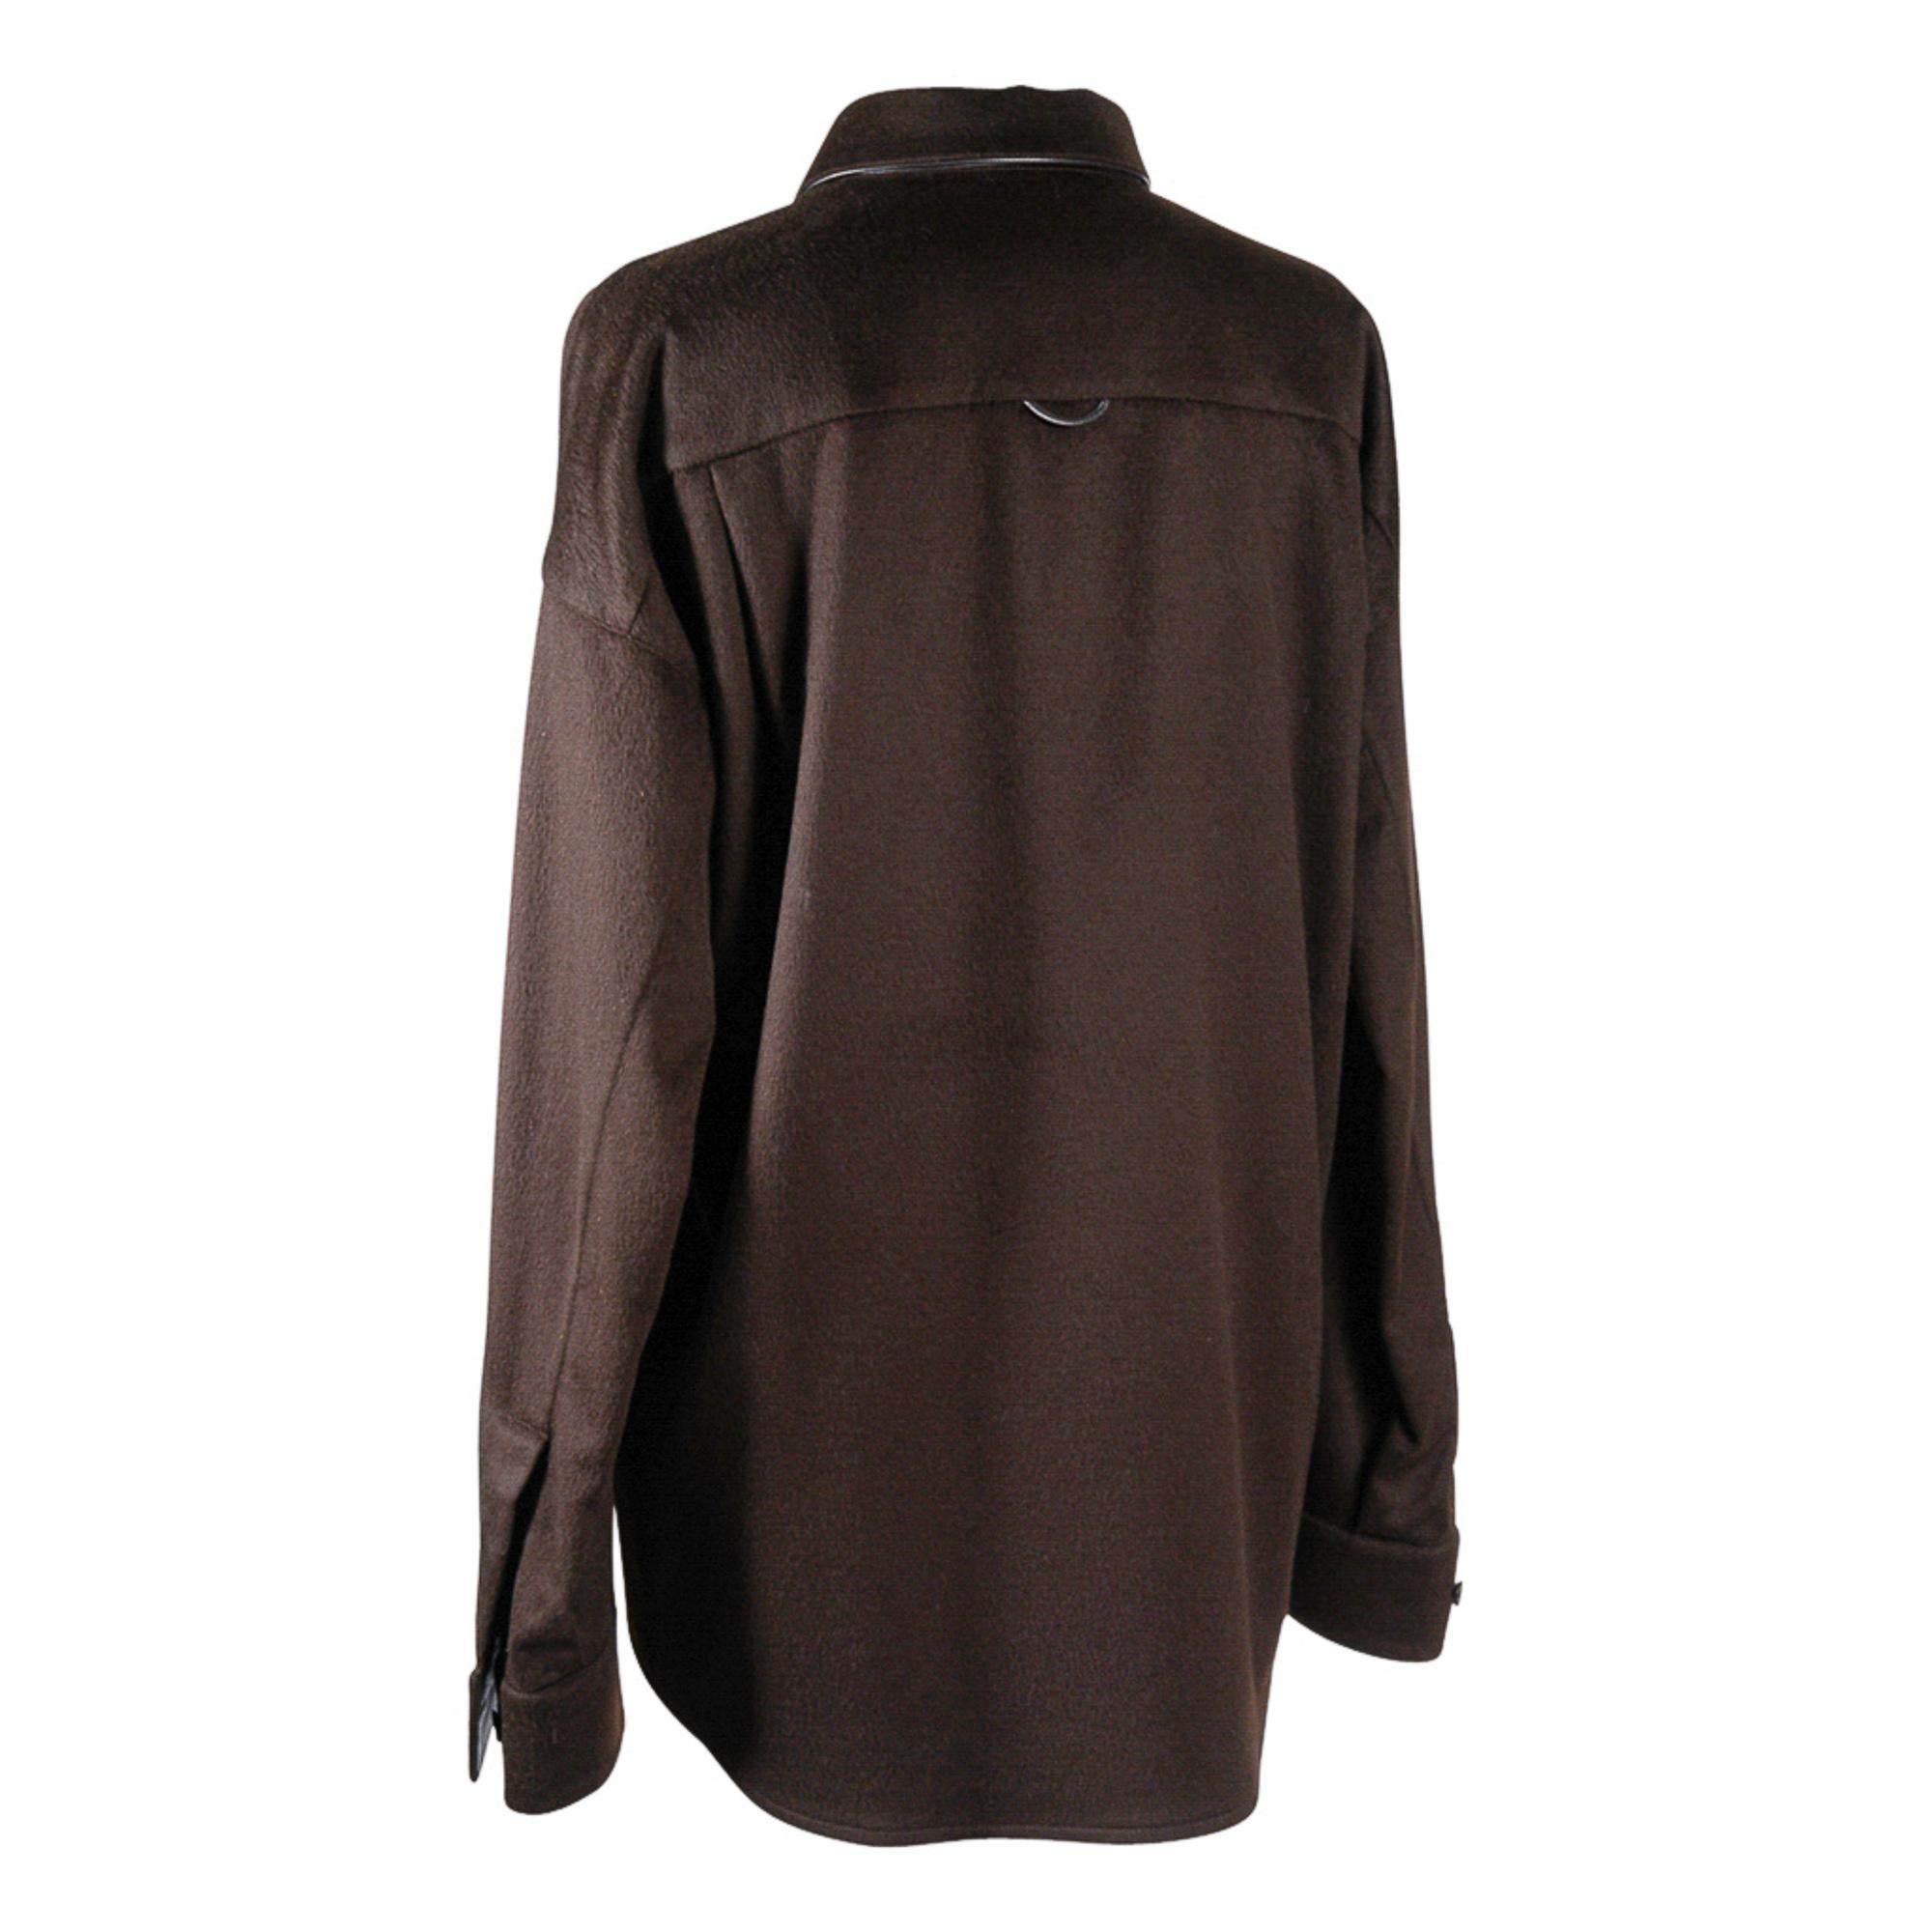 Agnona Cashmere and Leather Rich Chocolate Brown Shirt 46 In Excellent Condition For Sale In Miami, FL